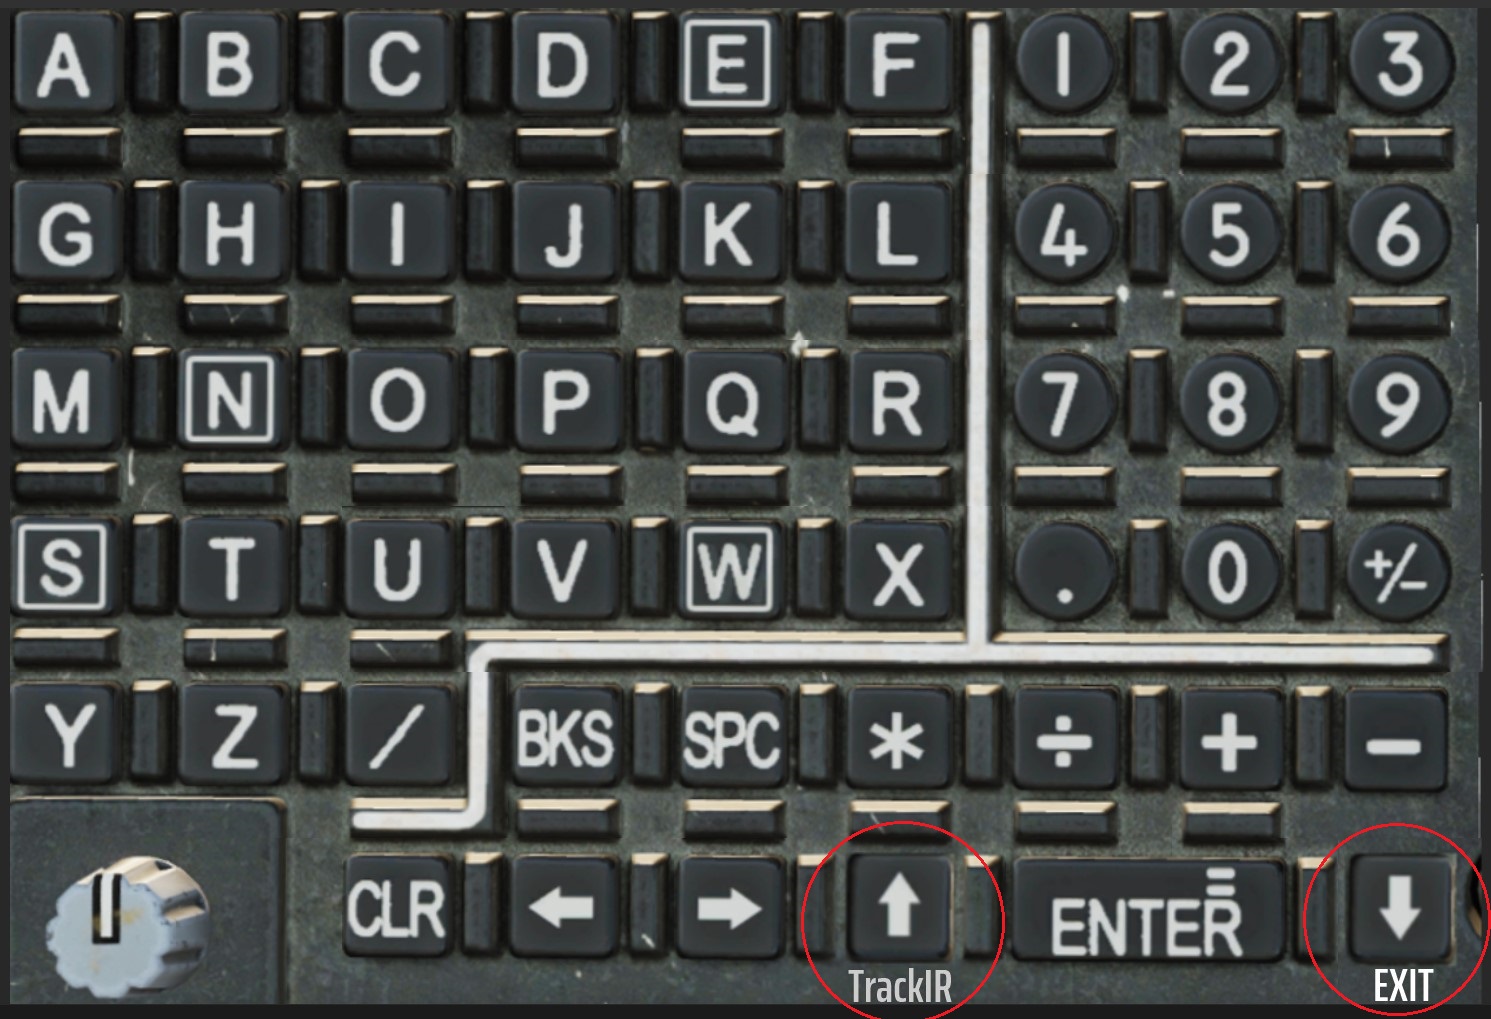 AH-64D Keyboard Unit Page v1.1 (Modified Skin) for Touch Portal